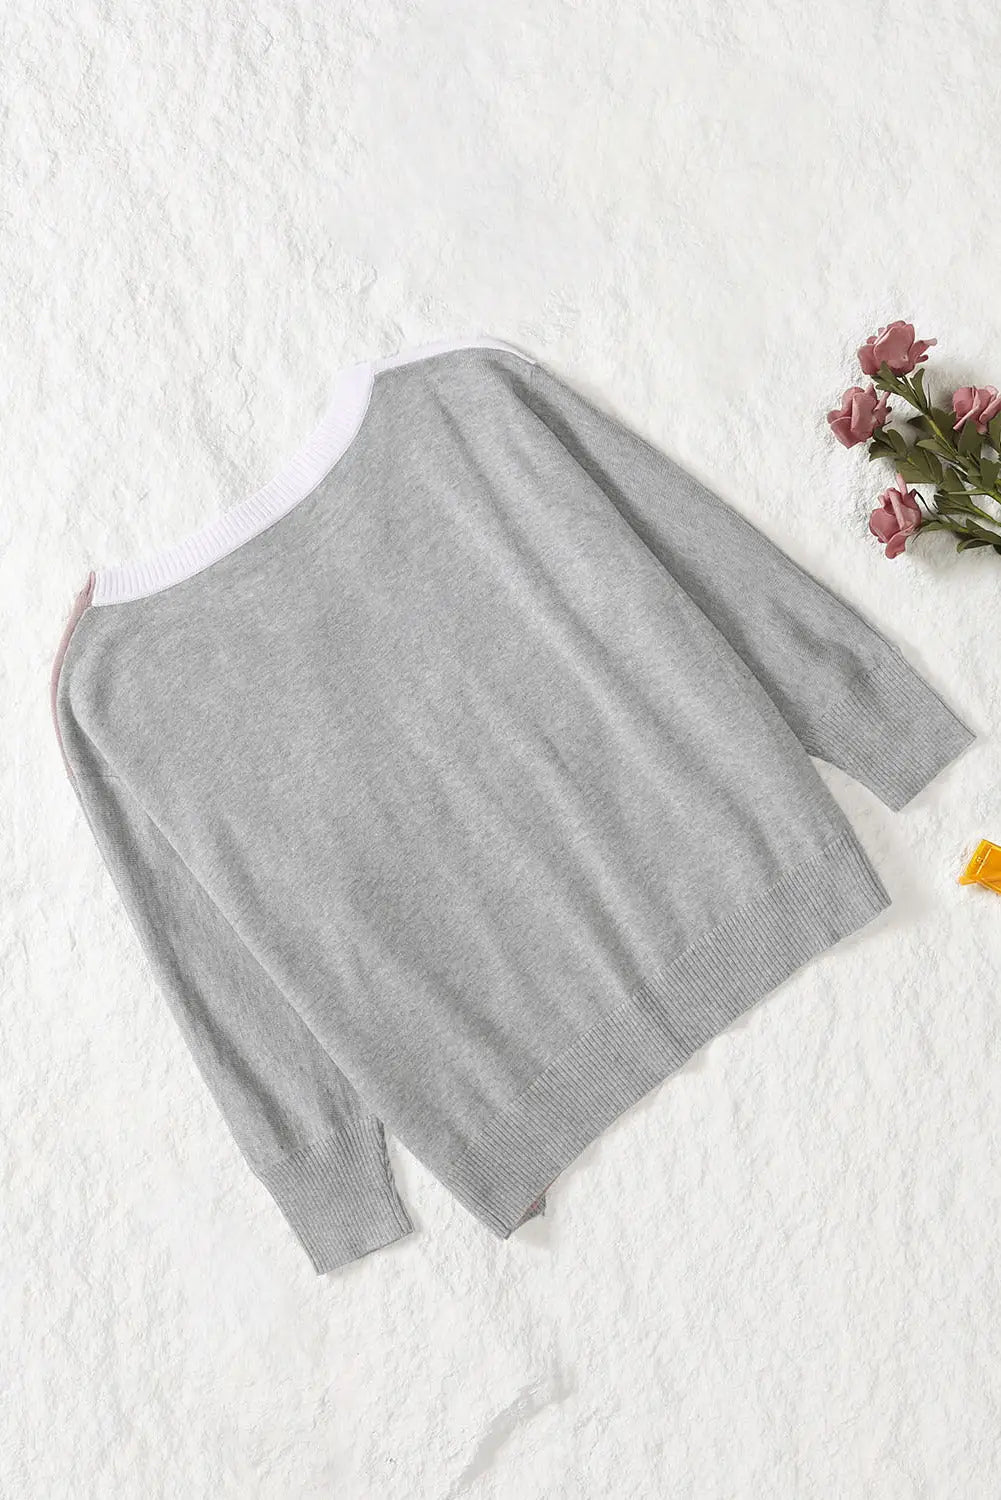 Apricot v-neck color block loose sweater - tops